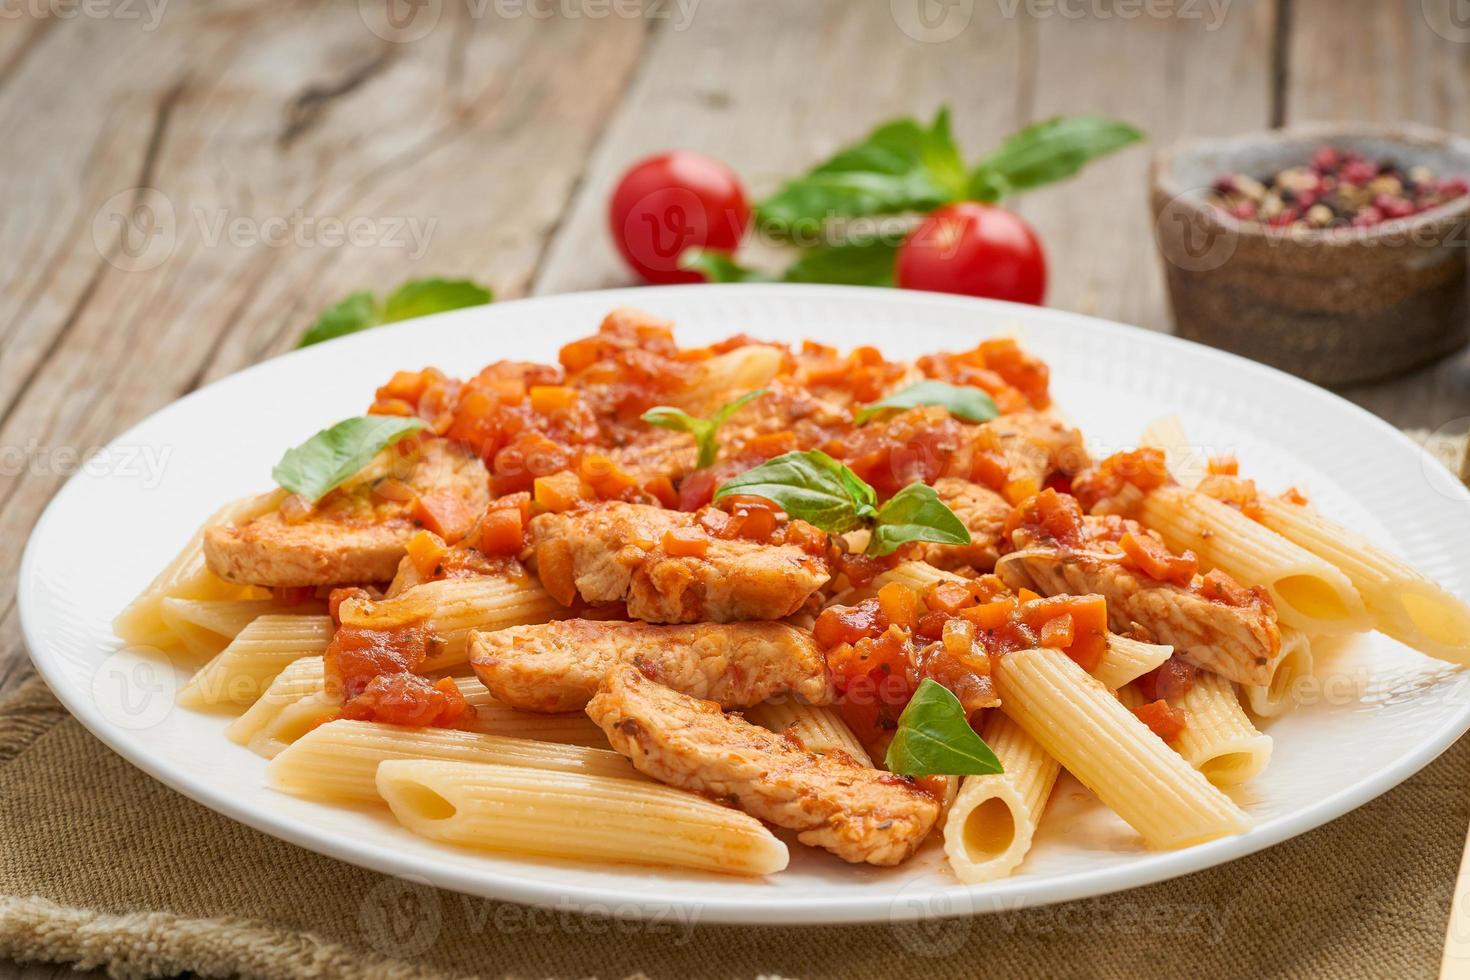 Penne pasta, chicken or turkey fillet, tomato sauce with basil leaves on old rustic wooden background. Close up, side view photo